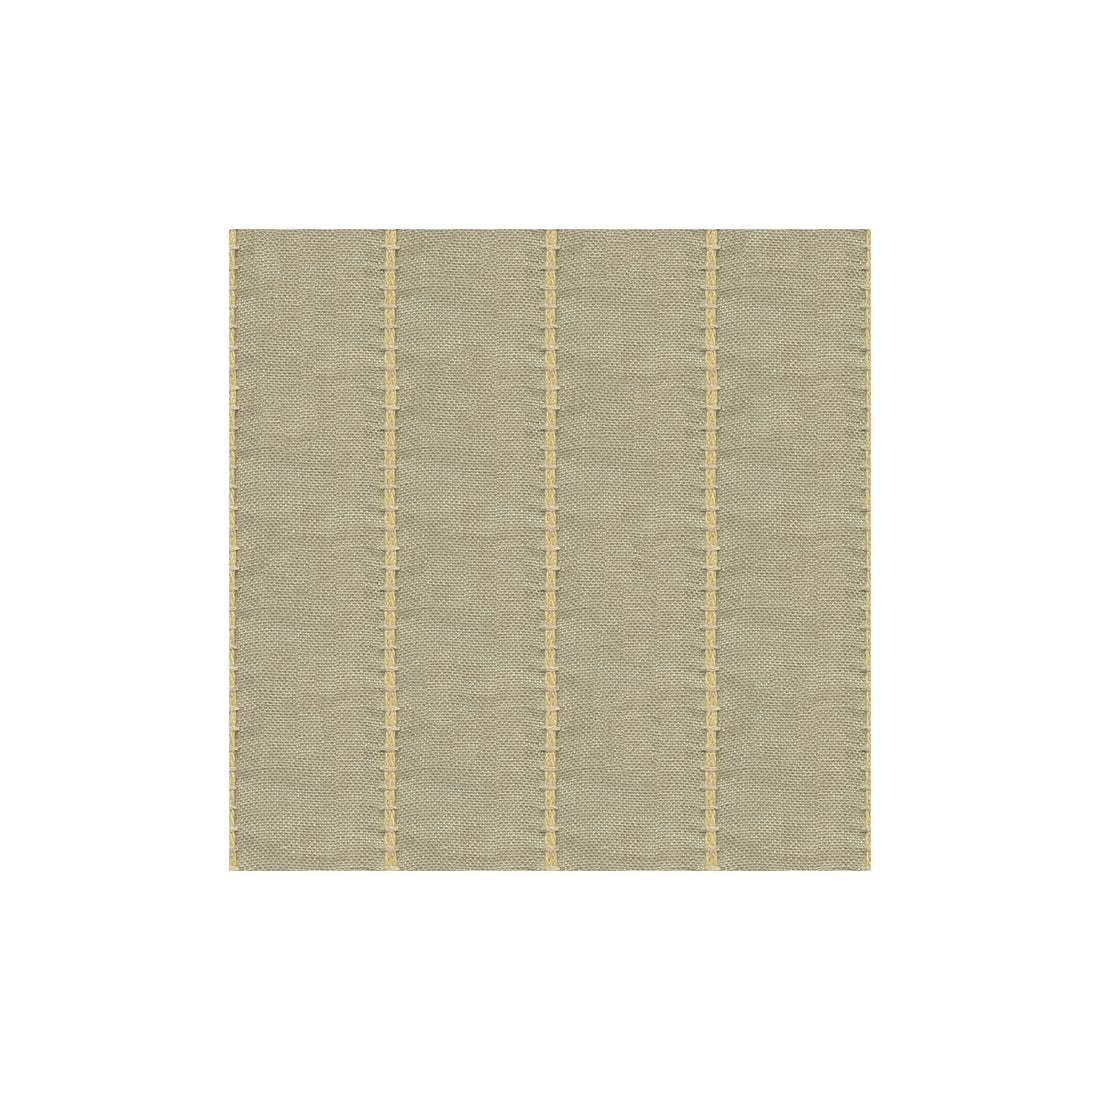 Sonjamb Jute fabric in linen color - pattern 3822.16.0 - by Kravet Design in the Barclay Butera II collection